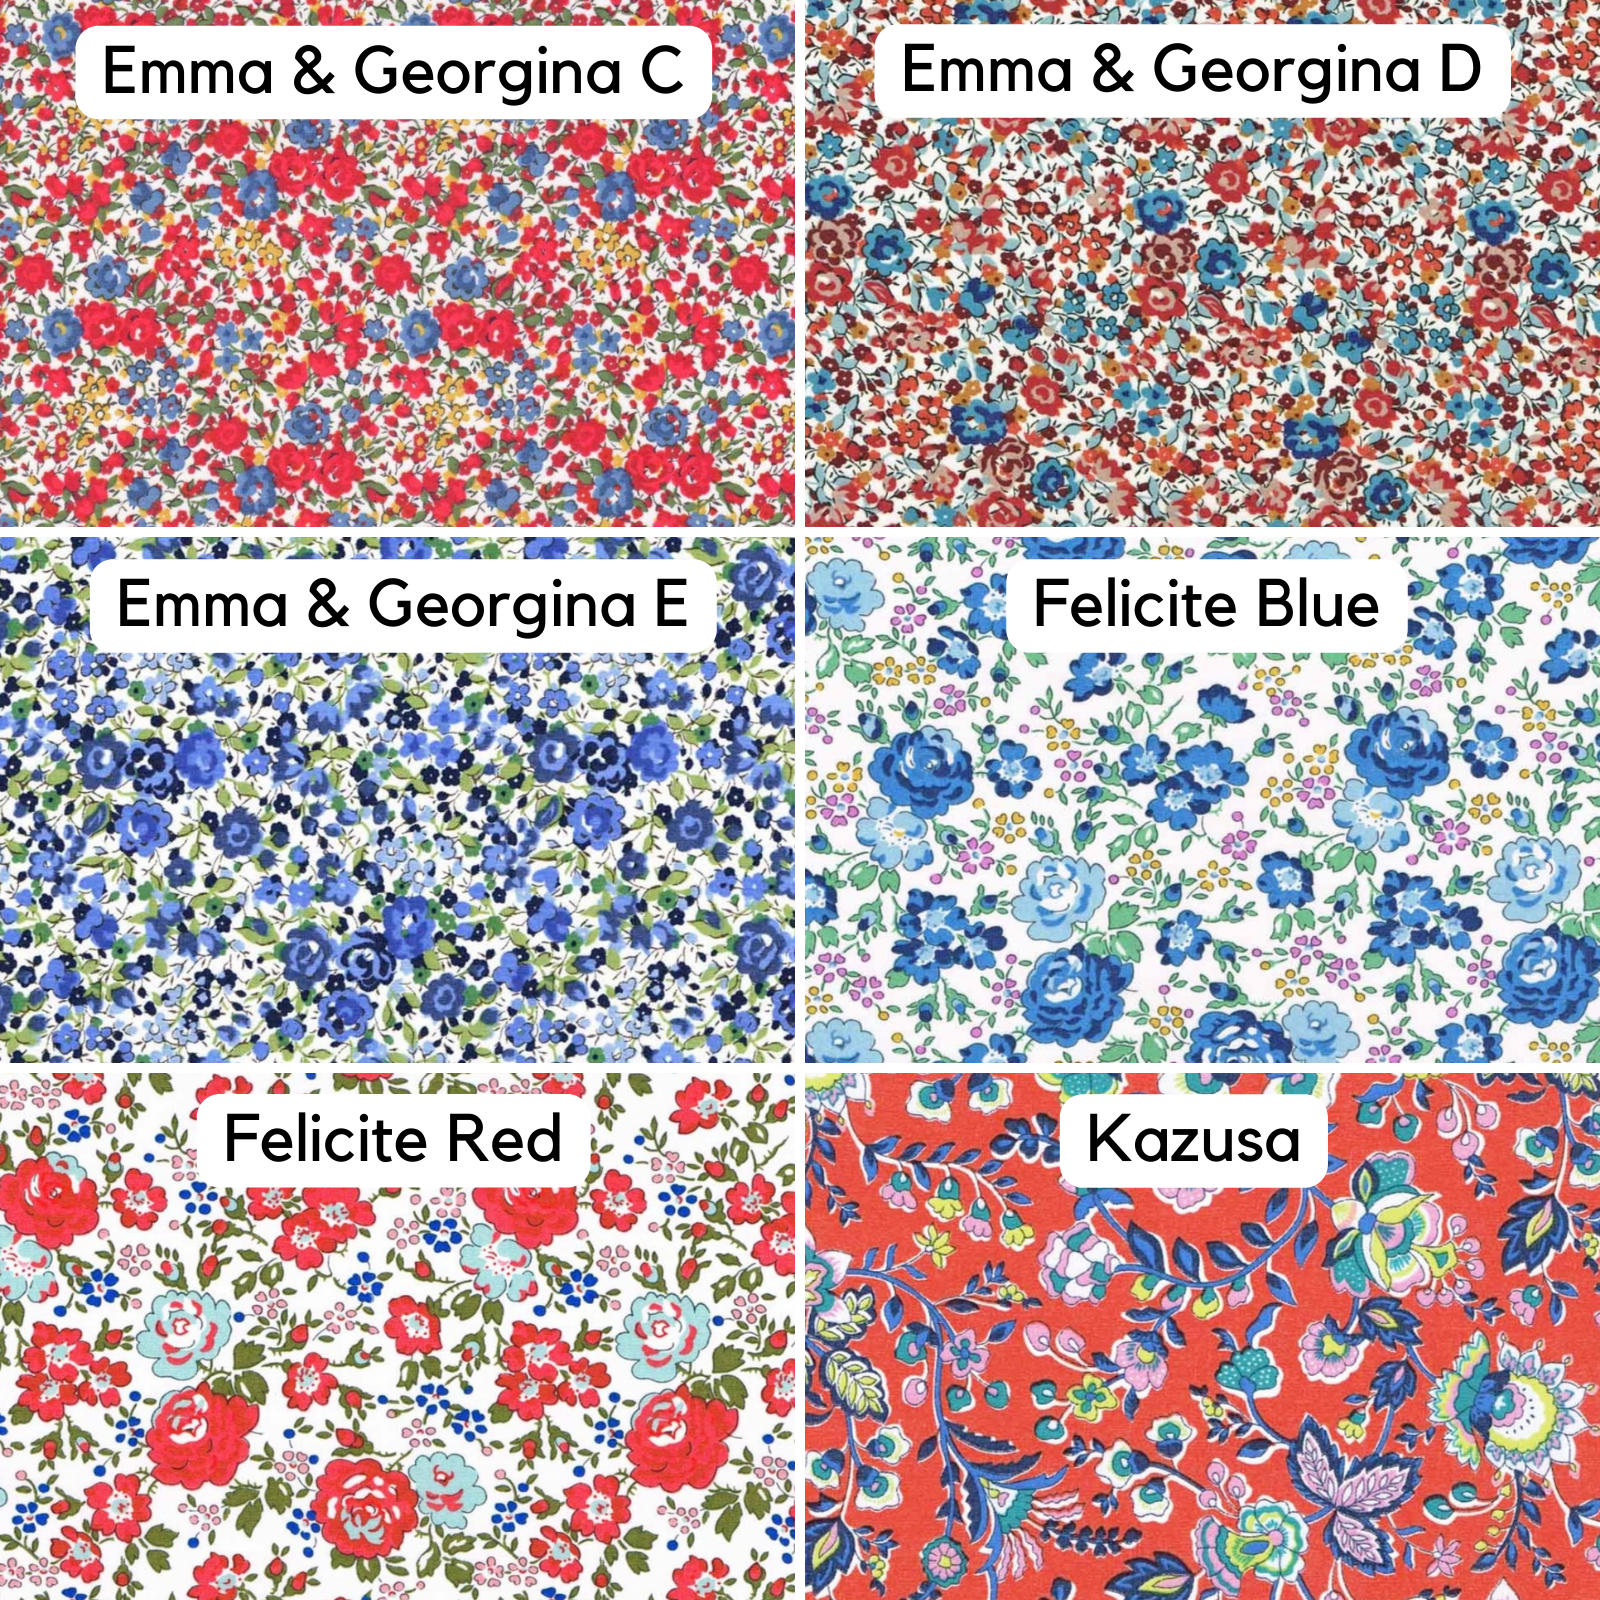 Image of 6 Liberty prints - Emma & Georgina C, Emma & Georgina D, Emma & Georgina E, Felicite Blue, Felicite Red and Kazusa which are all fabric options for an appliqued initial on our personalised nursery / school bags